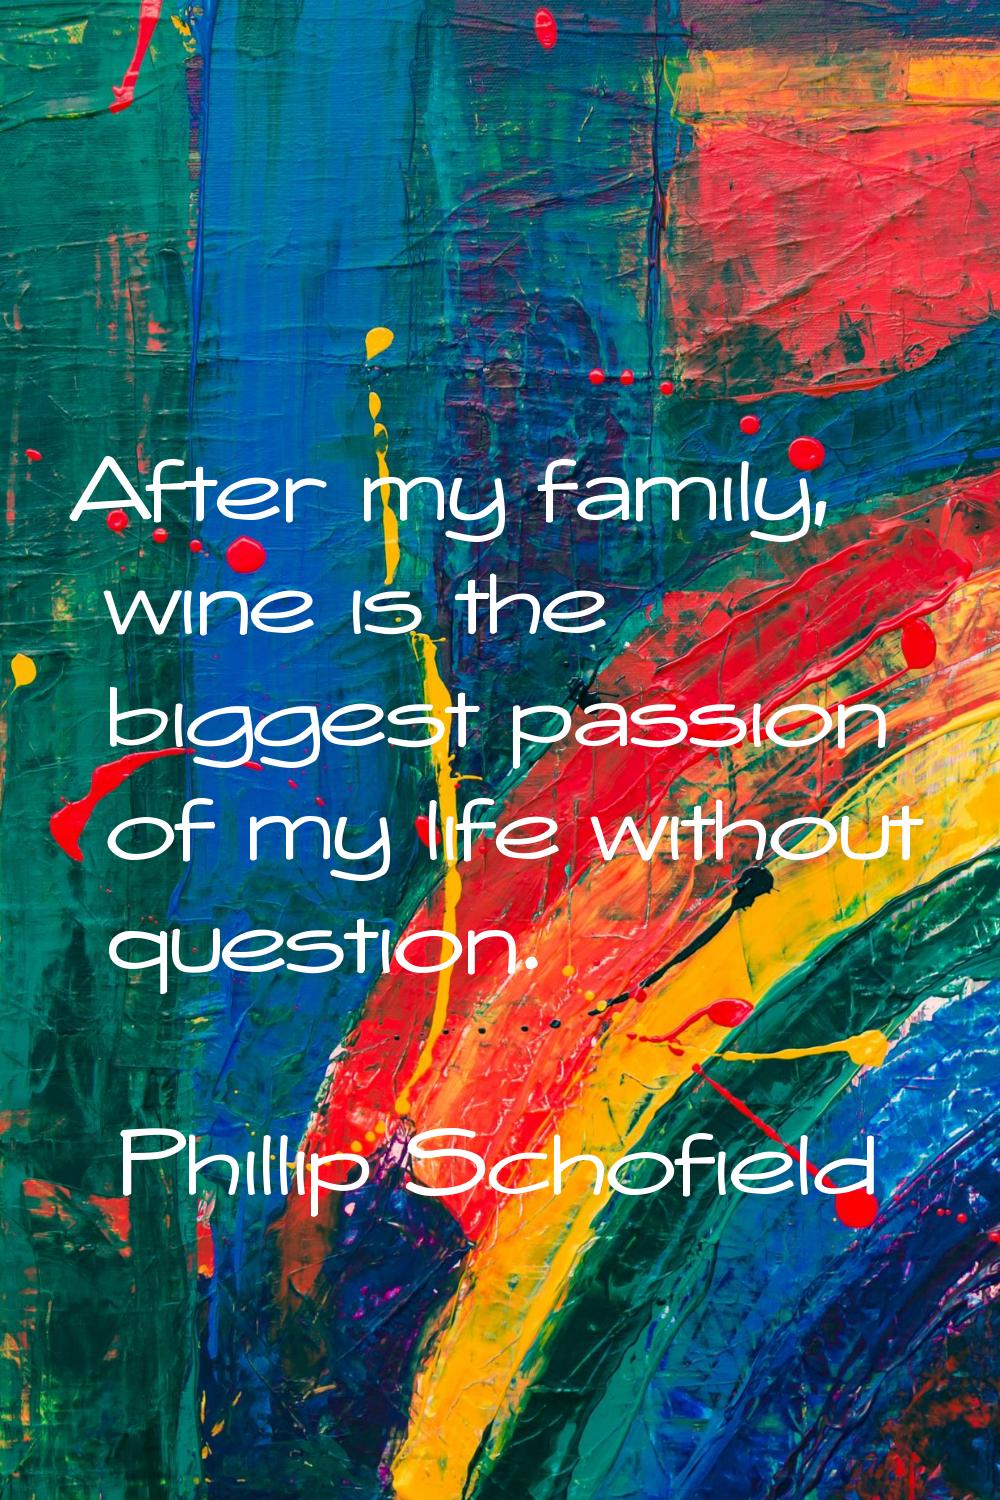 After my family, wine is the biggest passion of my life without question.